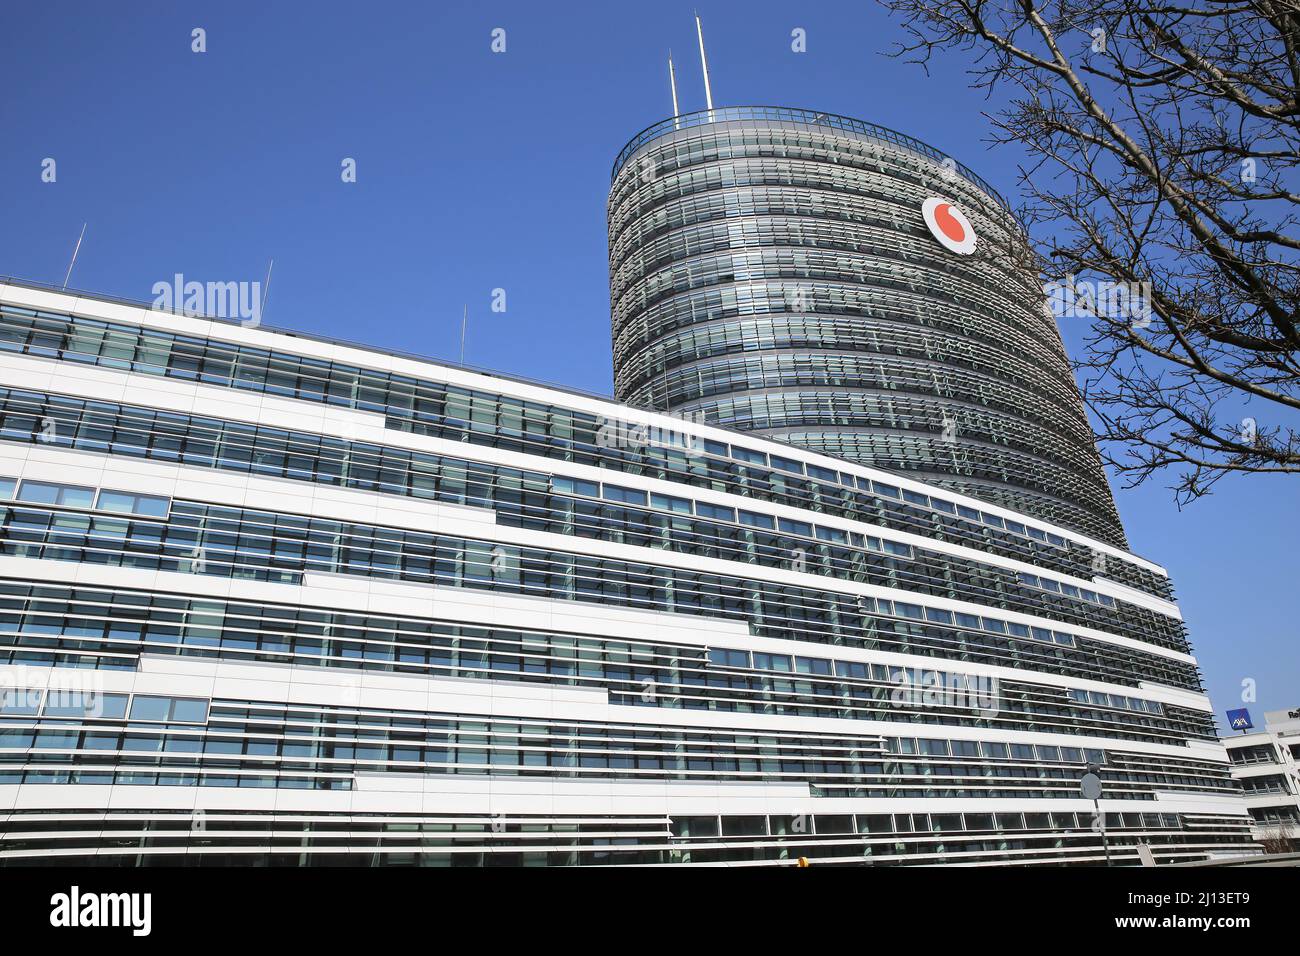 Düsseldorf (Vodafone campus) - March 9. 2022: View on modern office building complex with high tower against clear blue sky Stock Photo